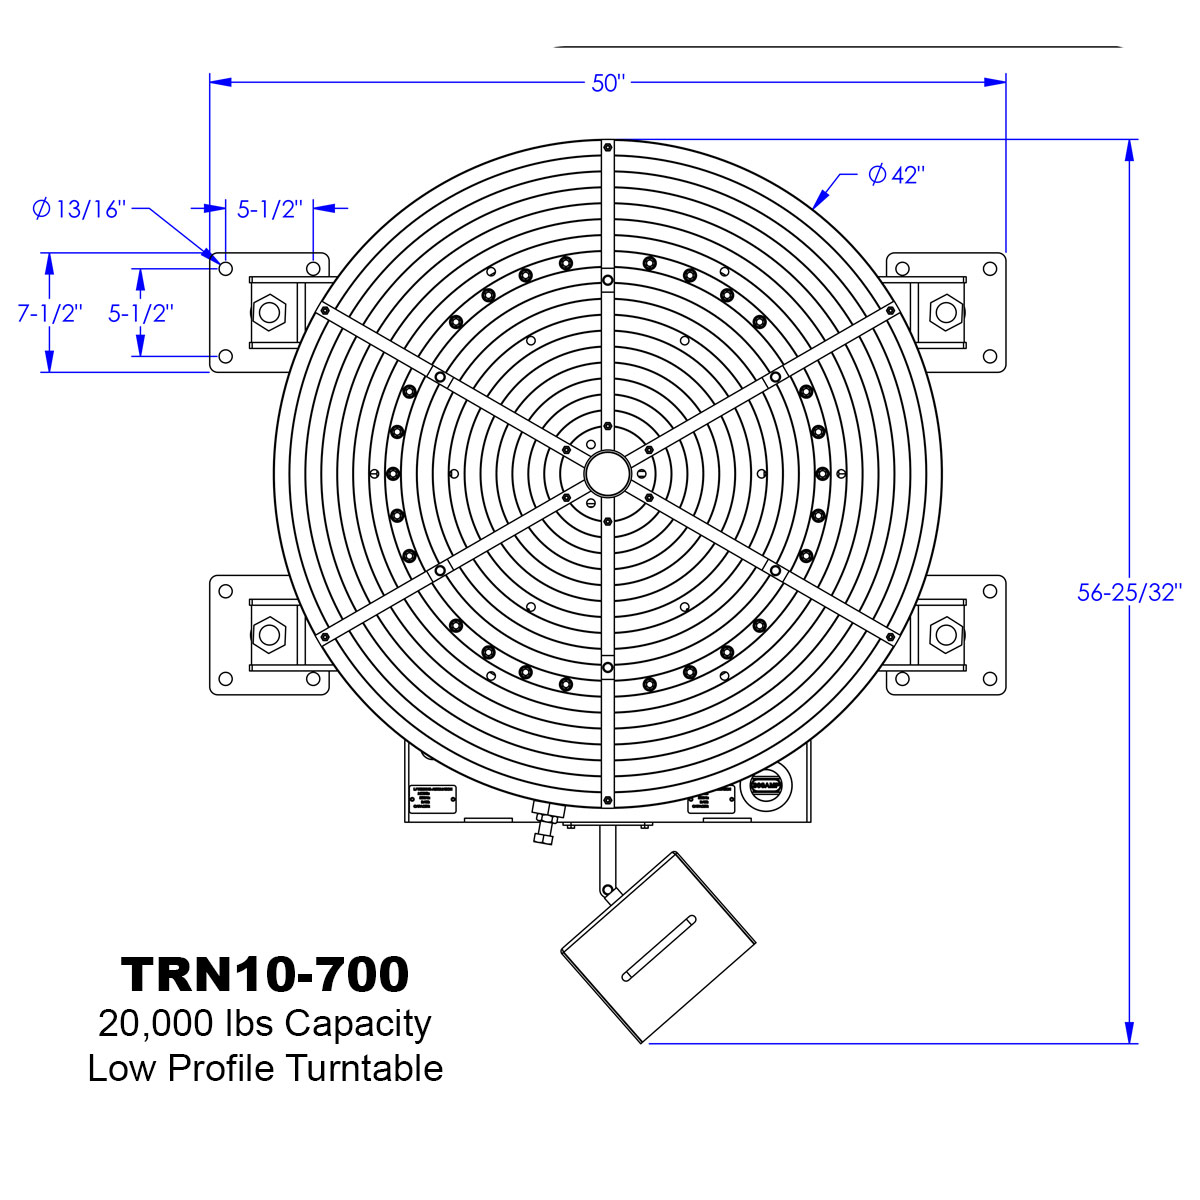 03-20000lb-Low-Profile-Turntable